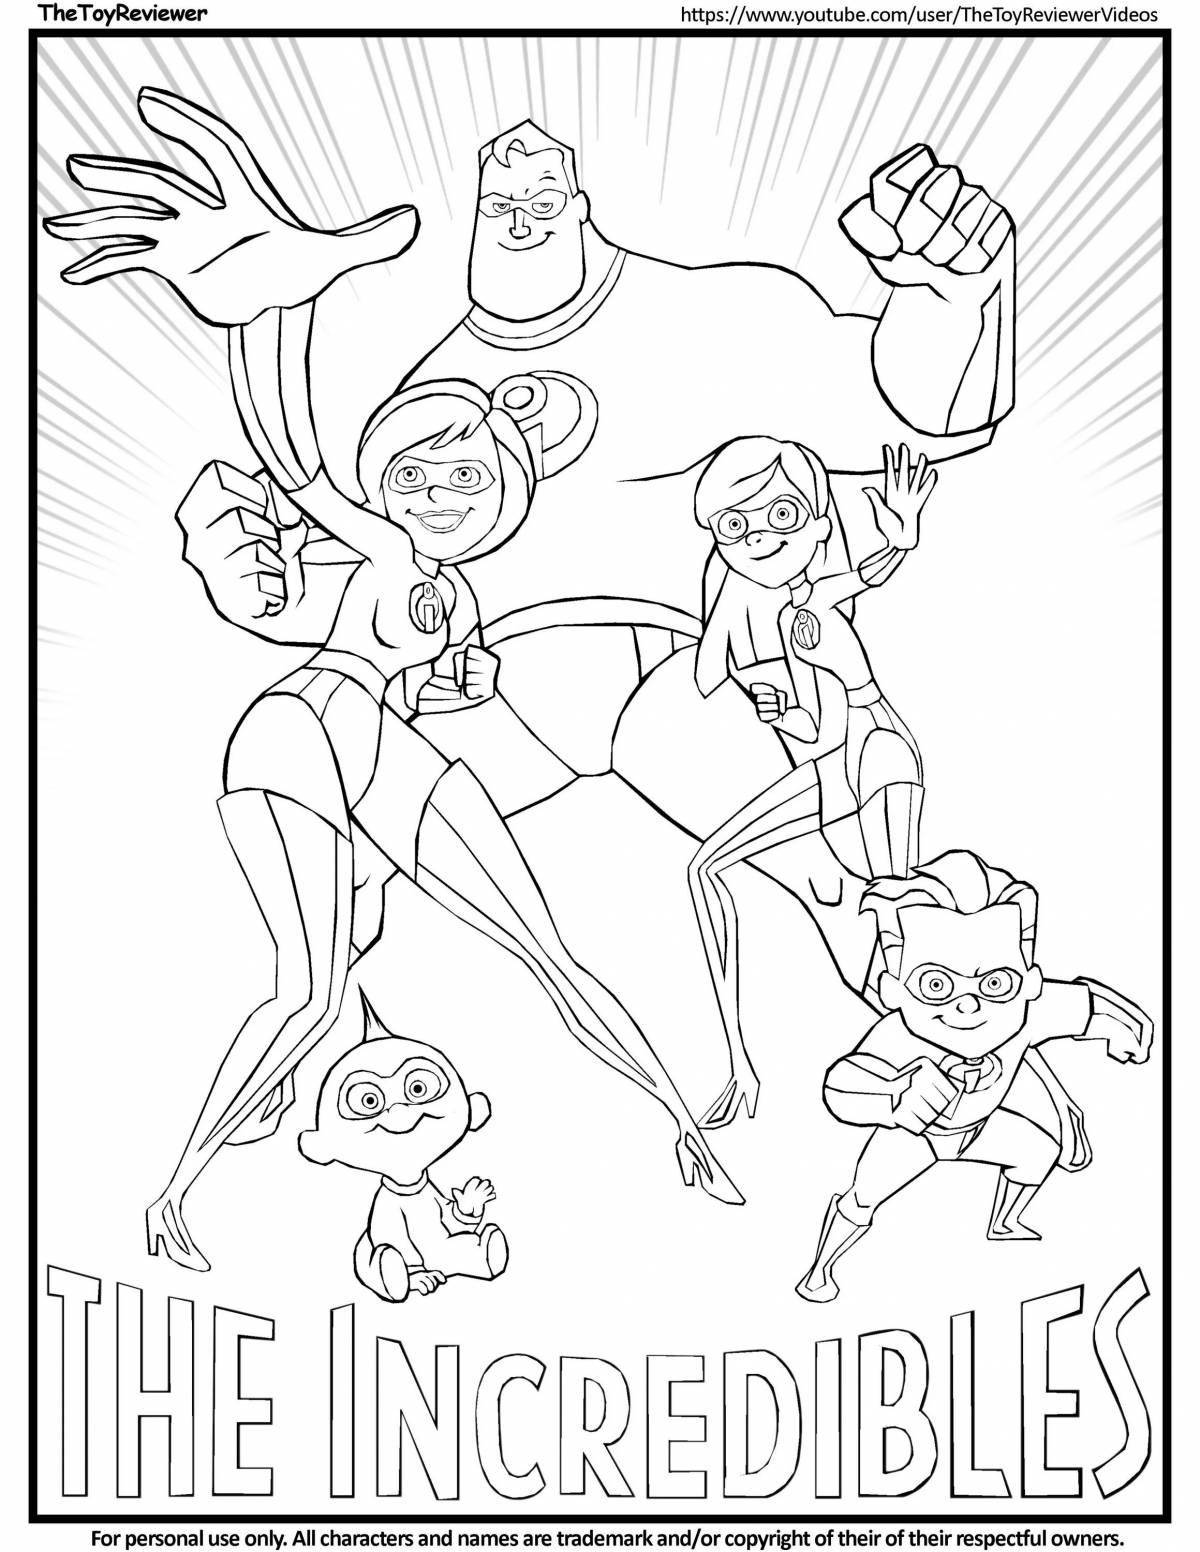 Sweet Incredibles coloring book for kids